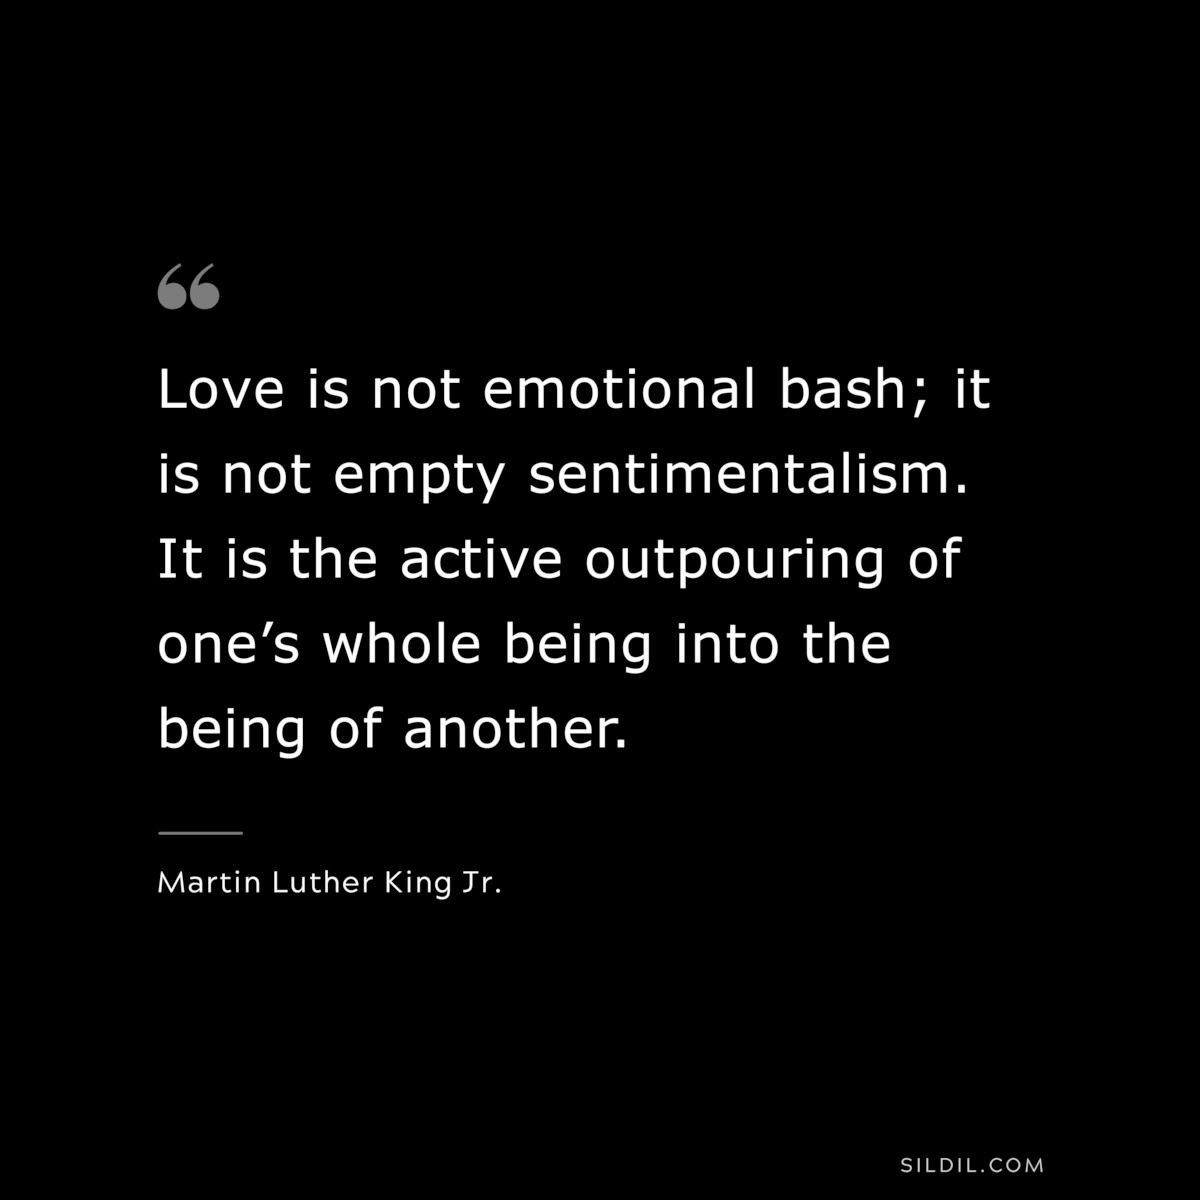 Love is not emotional bash; it is not empty sentimentalism. It is the active outpouring of one’s whole being into the being of another. ― Martin Luther King Jr.